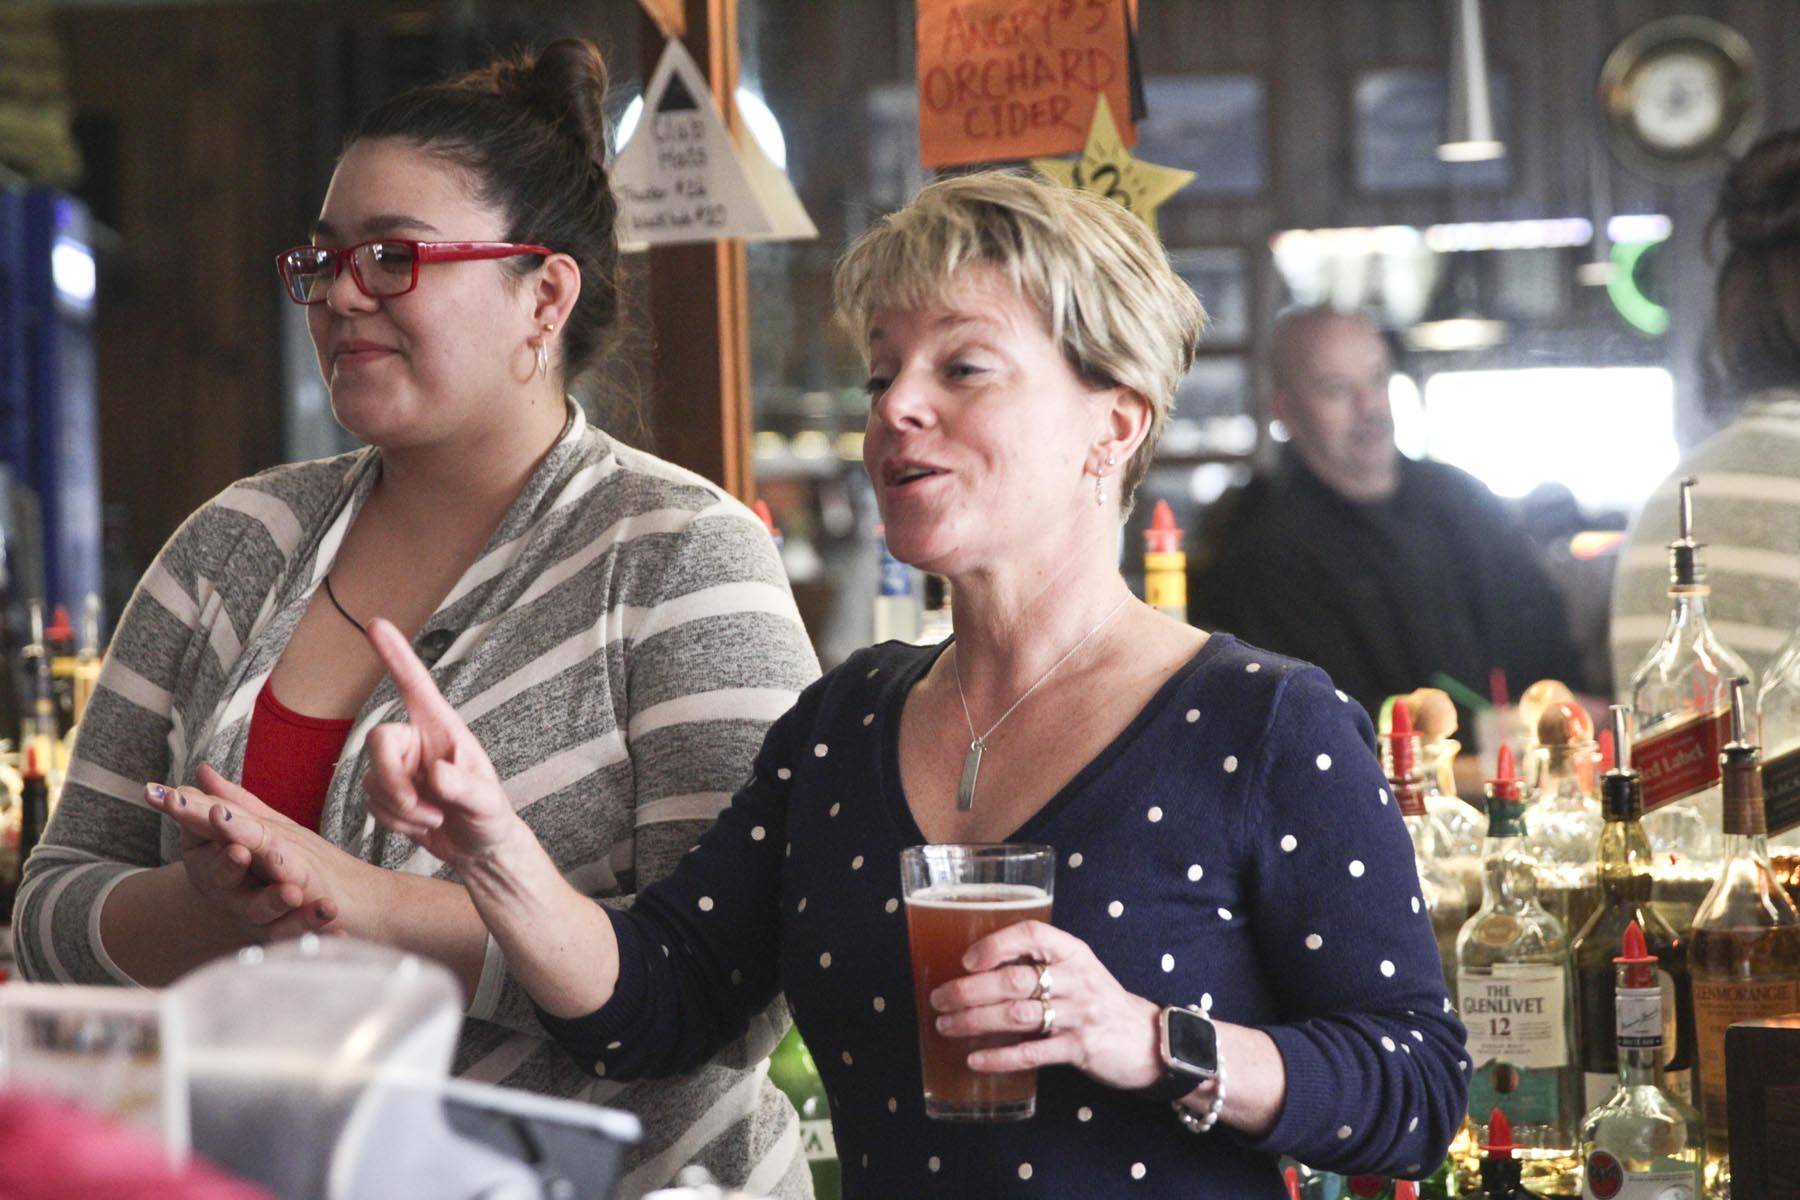 Triangle Club owner Leeann Thomas, right, and bartender Sam Sims, toast the bar at last call before an indefinite closure due to coronavirus prevention measure, March 18, 2020. (Michael S. Lockett | Juneau Empire)